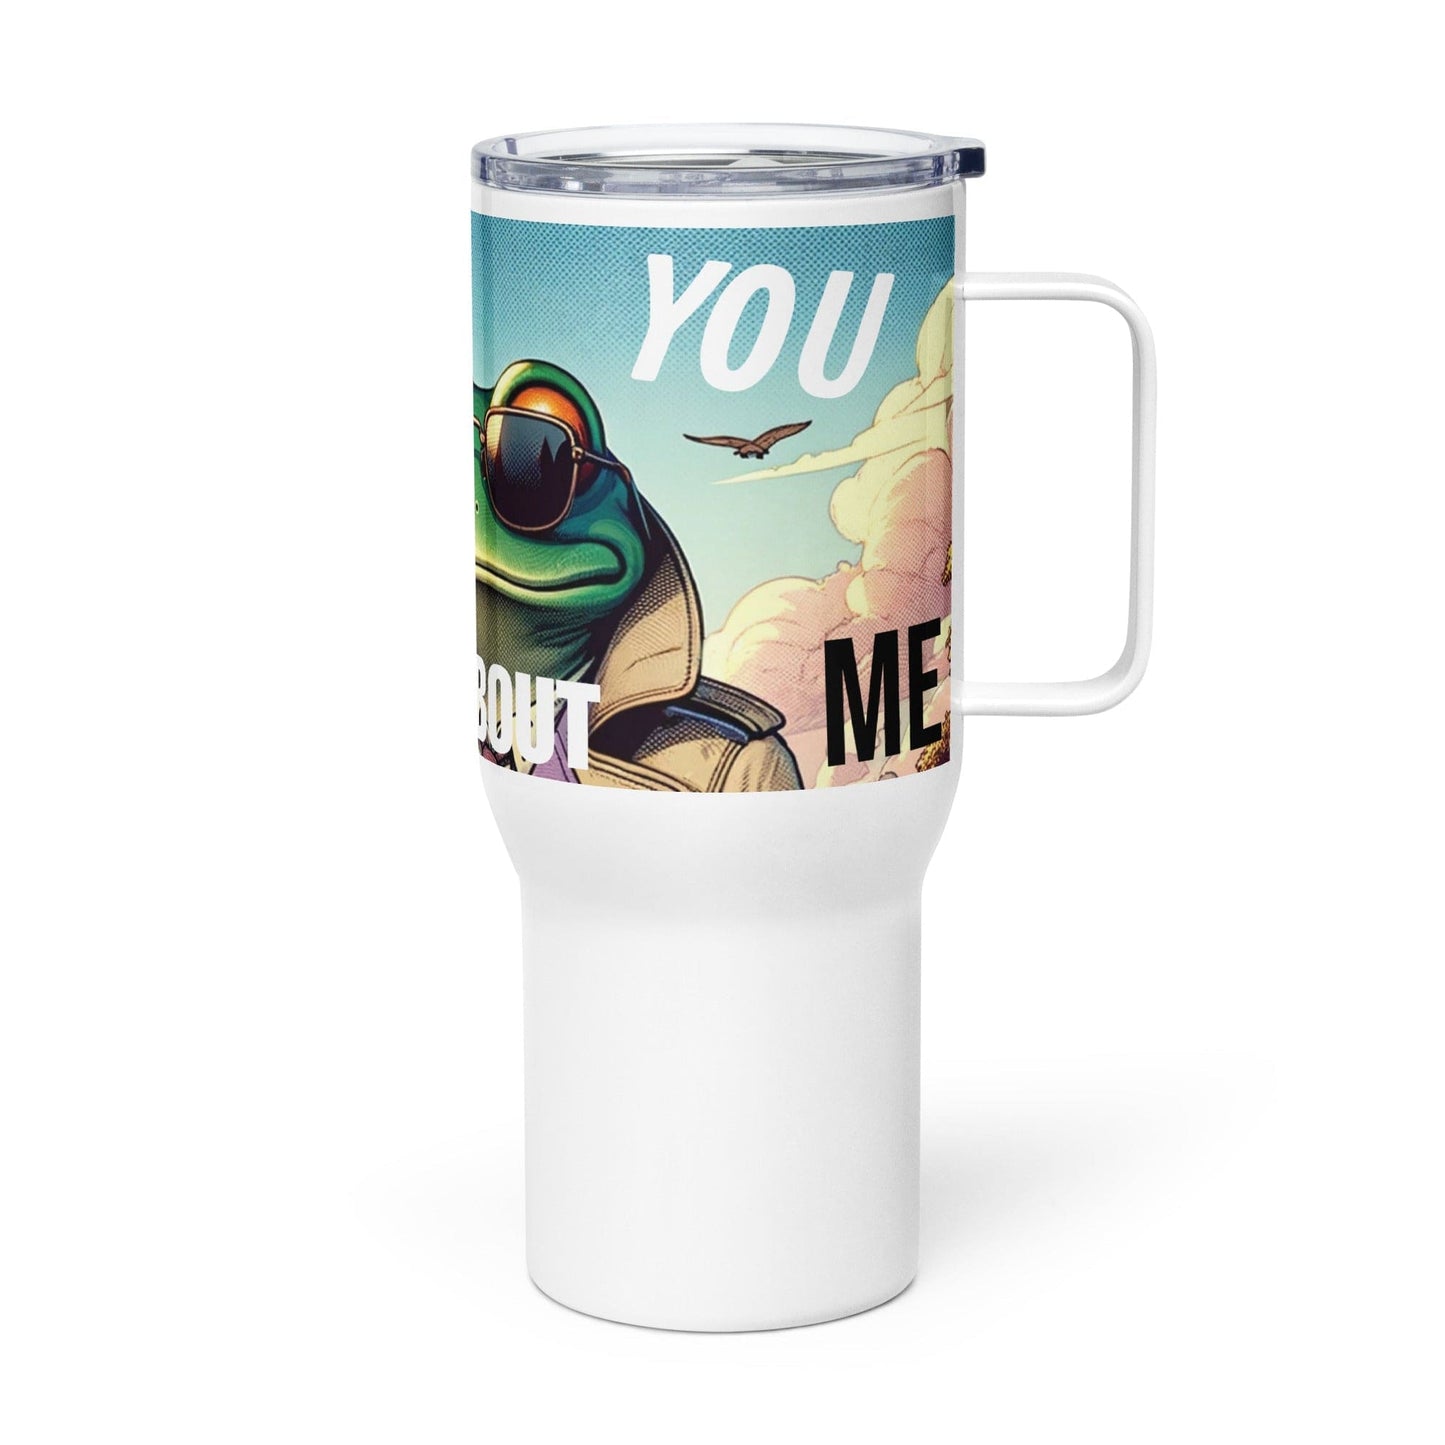 "Don't Froget Me: Cute Artsy Retro Funny 'Don't You Froget About Me' Travel Mug" - AIBUYDESIGN